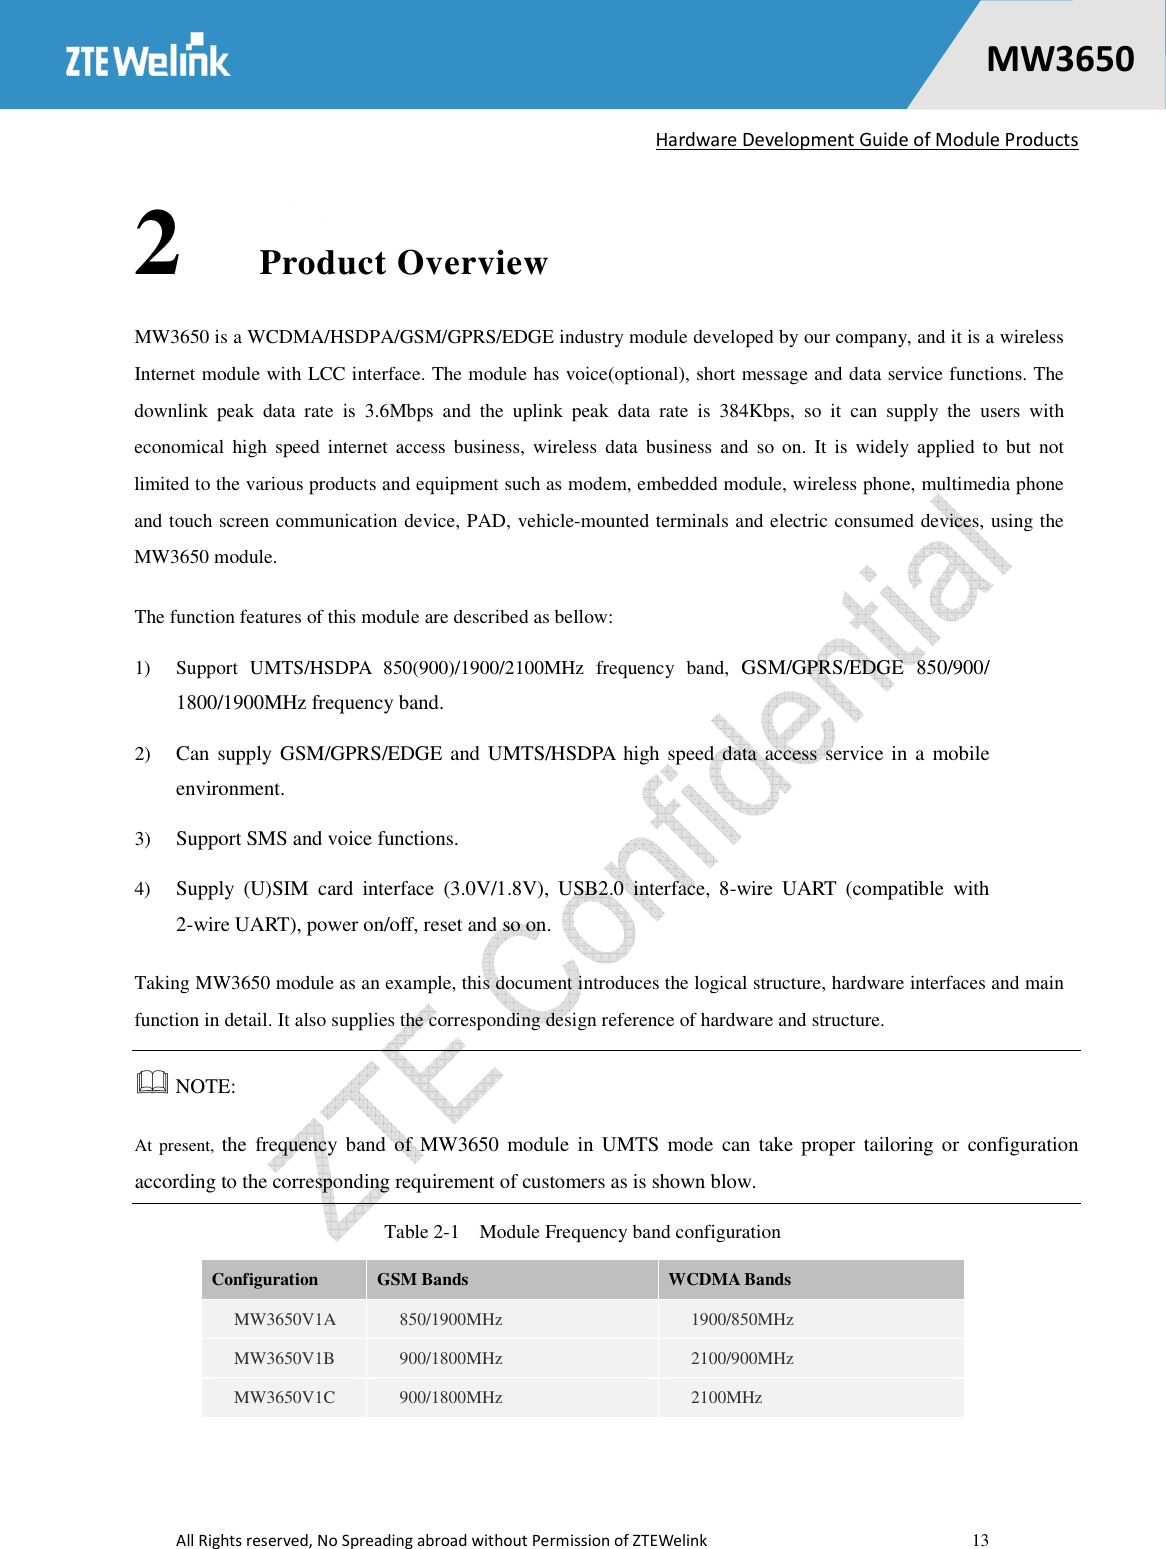   Hardware Development Guide of Module Products  All Rights reserved, No Spreading abroad without Permission of ZTEWelink    13    MW36500 2 Product Overview MW3650 is a WCDMA/HSDPA/GSM/GPRS/EDGE industry module developed by our company, and it is a wireless Internet module with LCC interface. The module has voice(optional), short message and data service functions. The downlink  peak  data  rate  is  3.6Mbps  and  the  uplink  peak  data  rate  is  384Kbps,  so  it  can  supply  the  users  with economical  high  speed  internet  access  business,  wireless  data  business  and  so  on.  It  is  widely  applied  to  but  not limited to the various products and equipment such as modem, embedded module, wireless phone, multimedia phone and touch screen communication device, PAD, vehicle-mounted terminals and electric consumed devices, using the MW3650 module. The function features of this module are described as bellow: 1) Support  UMTS/HSDPA  850(900)/1900/2100MHz  frequency  band, GSM/GPRS/EDGE  850/900/ 1800/1900MHz frequency band. 2) Can supply GSM/GPRS/EDGE and UMTS/HSDPA  high speed data  access service in a  mobile environment. 3) Support SMS and voice functions. 4) Supply  (U)SIM  card  interface  (3.0V/1.8V),  USB2.0  interface,  8-wire  UART  (compatible  with 2-wire UART), power on/off, reset and so on. Taking MW3650 module as an example, this document introduces the logical structure, hardware interfaces and main function in detail. It also supplies the corresponding design reference of hardware and structure.  NOTE:   At present,  the  frequency  band  of  MW3650  module  in UMTS mode  can  take  proper  tailoring or  configuration according to the corresponding requirement of customers as is shown blow. Table 2-1    Module Frequency band configuration Configuration  GSM Bands  WCDMA Bands MW3650V1A  850/1900MHz  1900/850MHz MW3650V1B  900/1800MHz  2100/900MHz MW3650V1C  900/1800MHz  2100MHz 